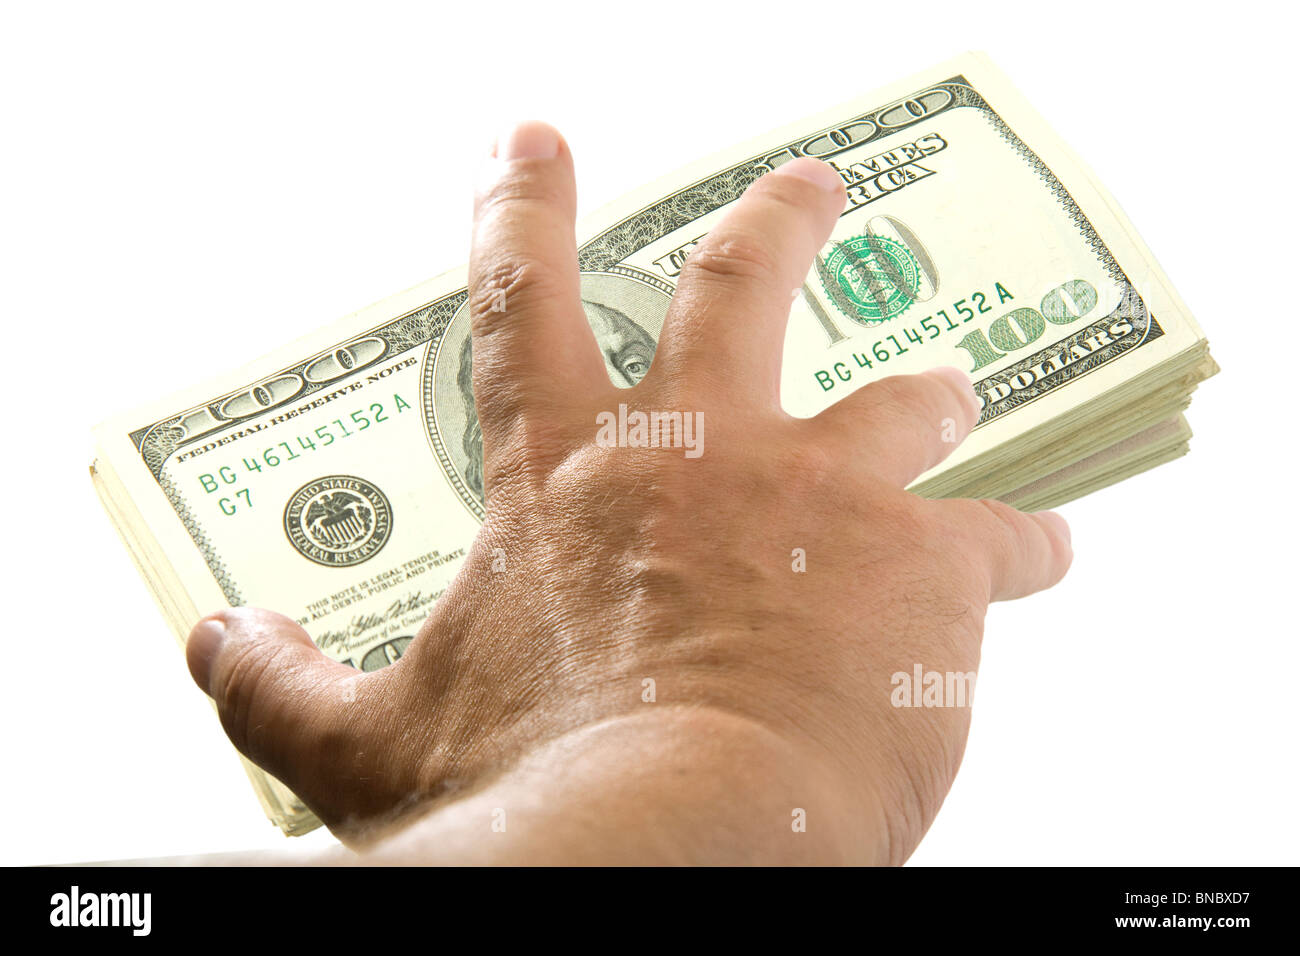 Hand trying to take a stack of dollars Stock Photo